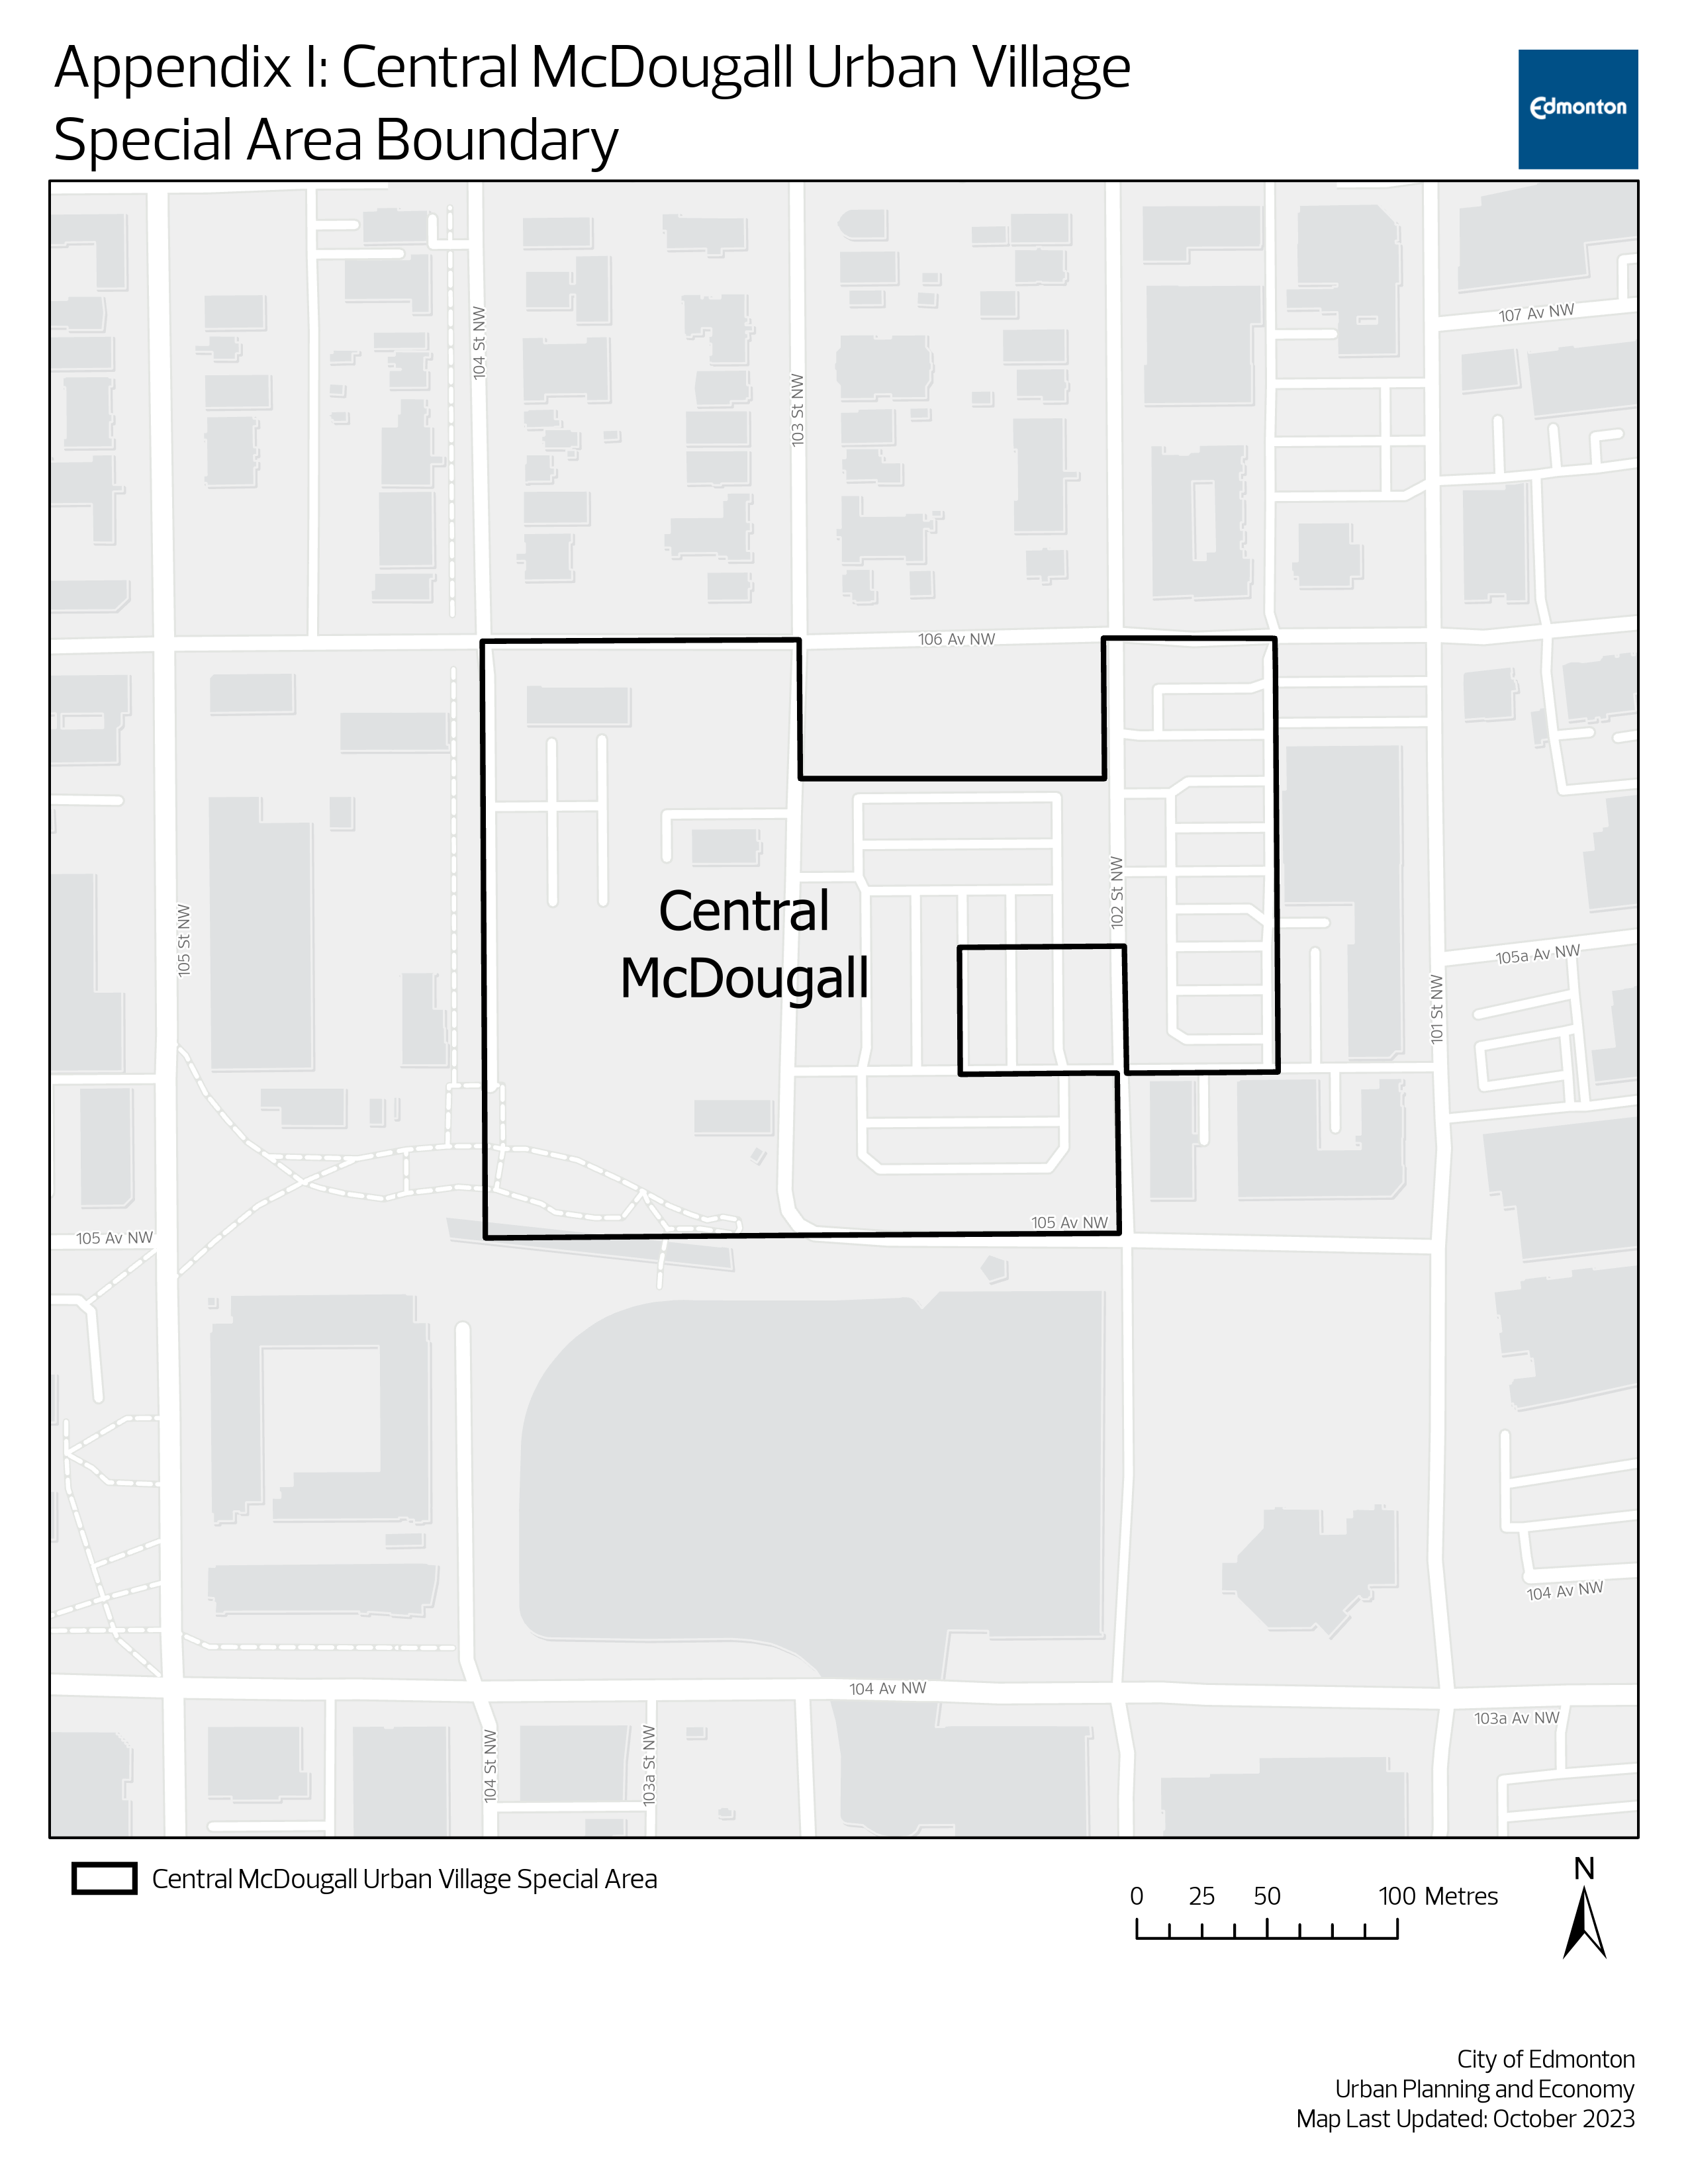 Central McDougall Urban Village Special Area boundary map